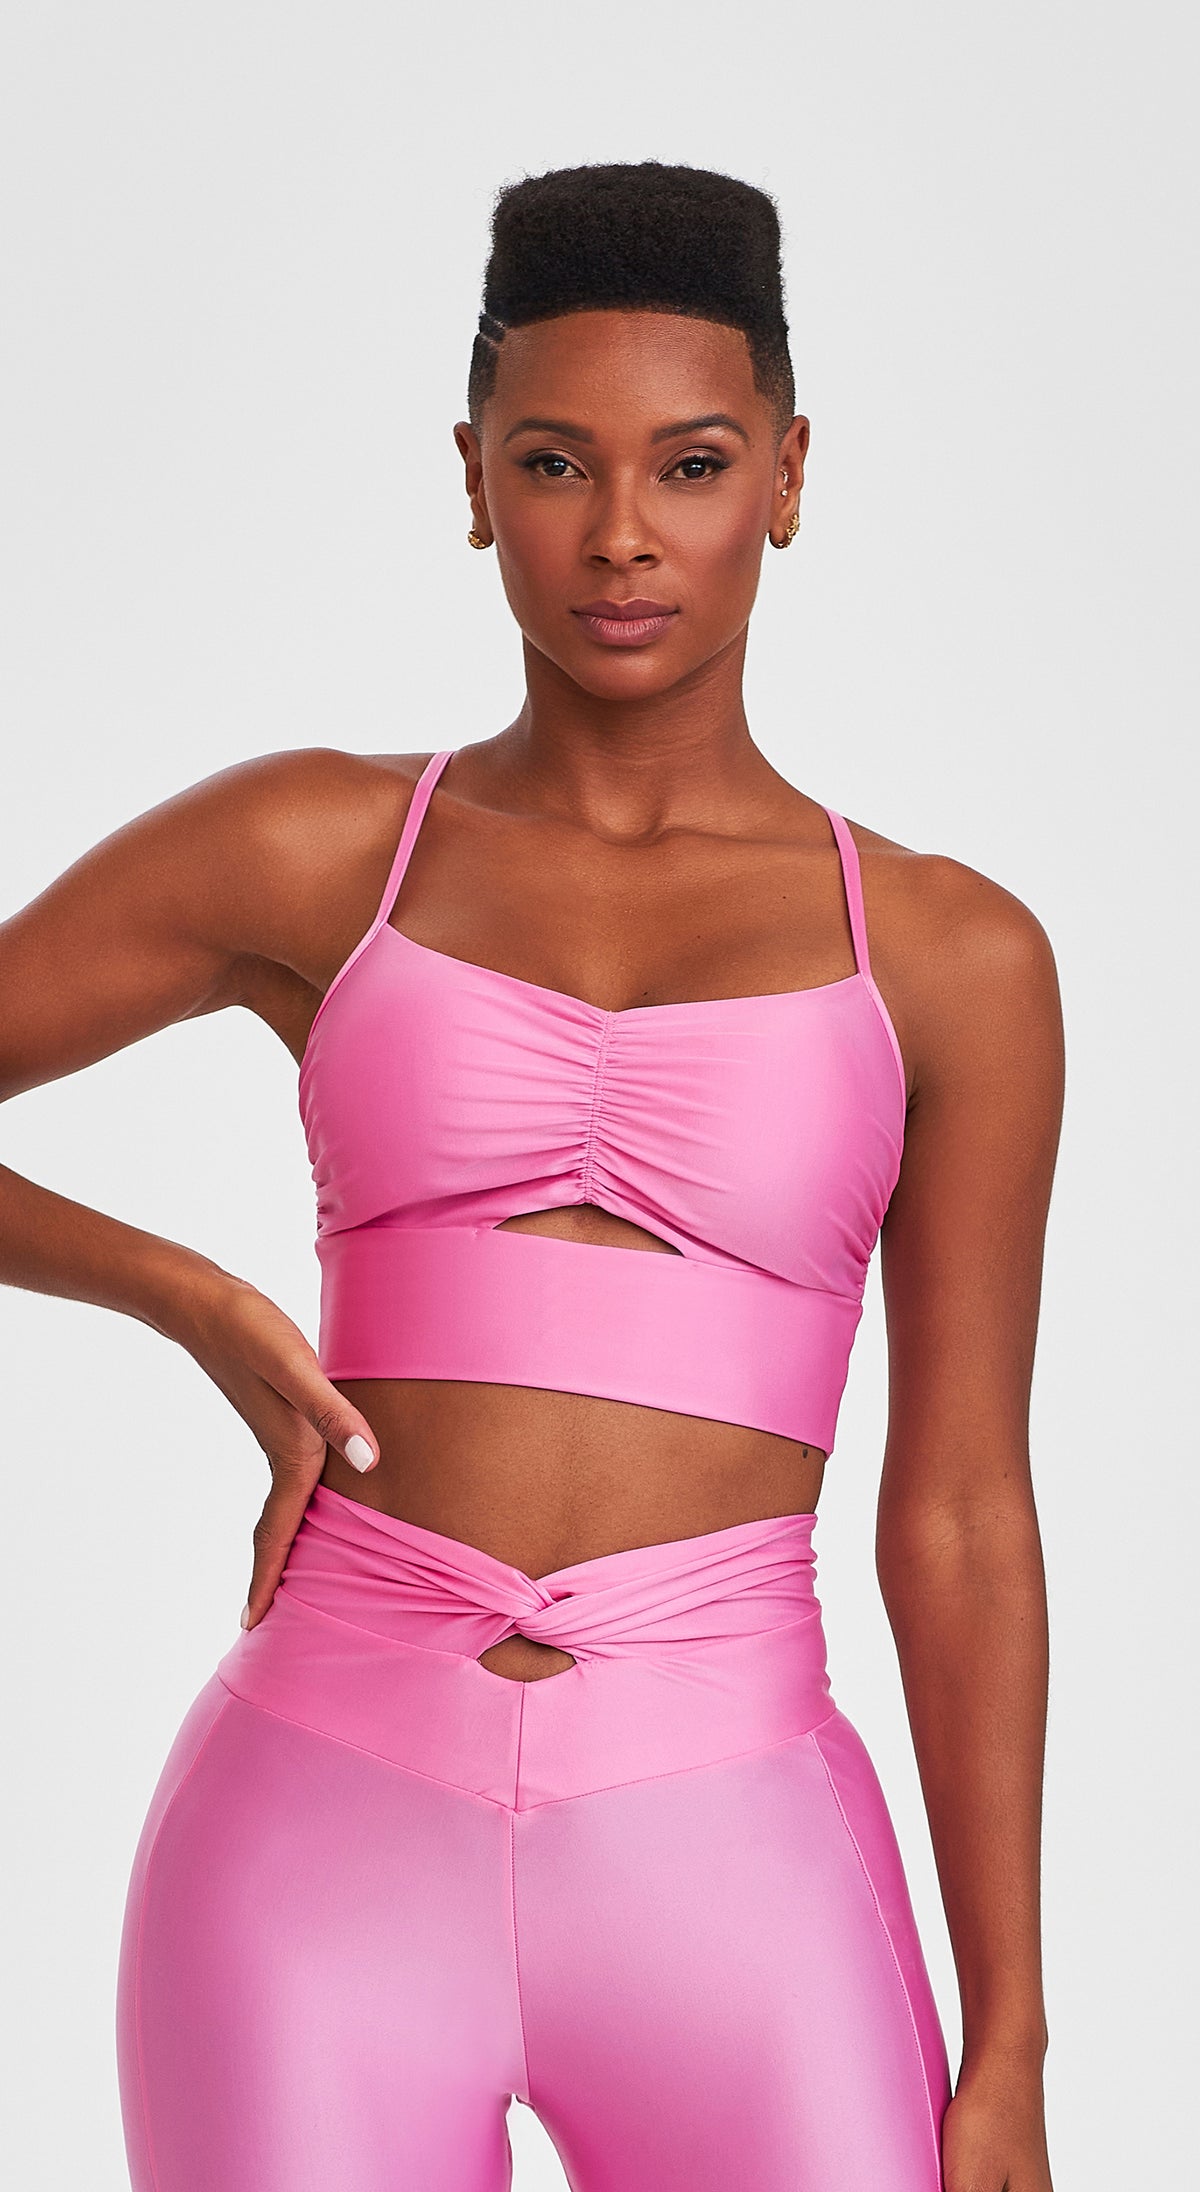 Atletika Open Front Cropped Top - Pink